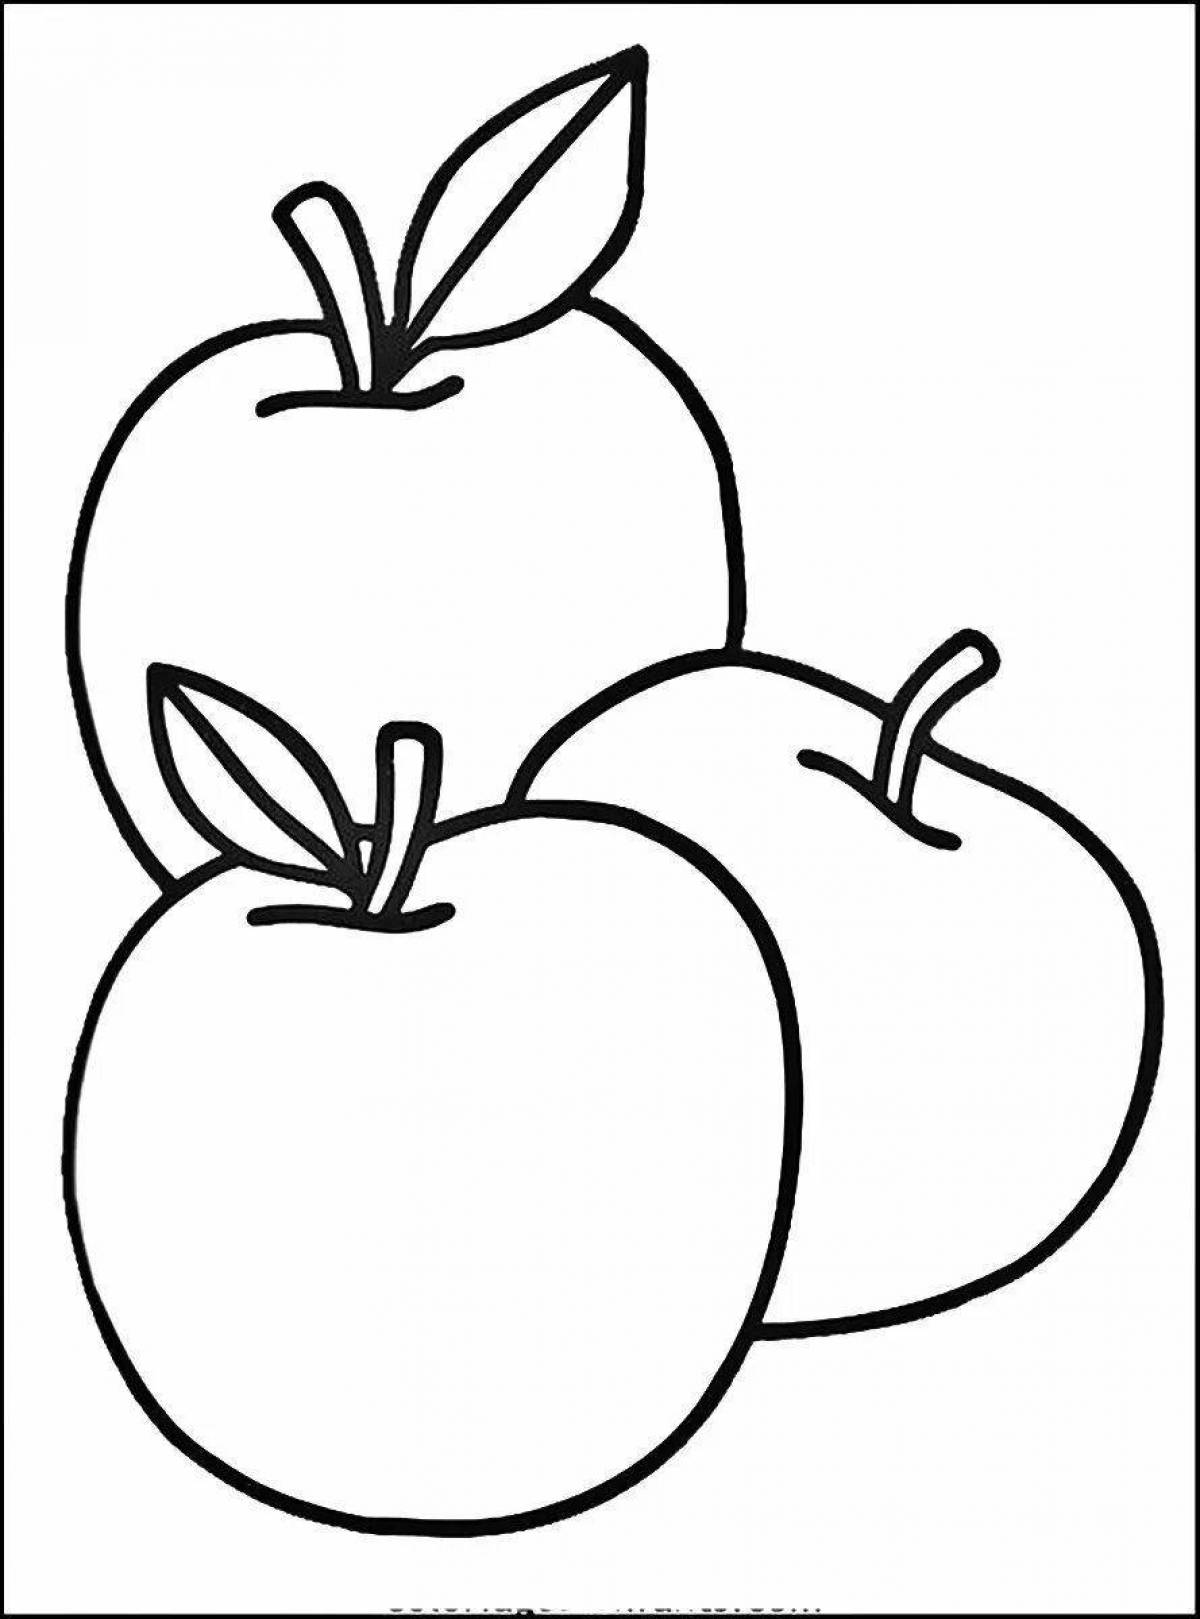 Joyful apple coloring book for kids 5-6 years old